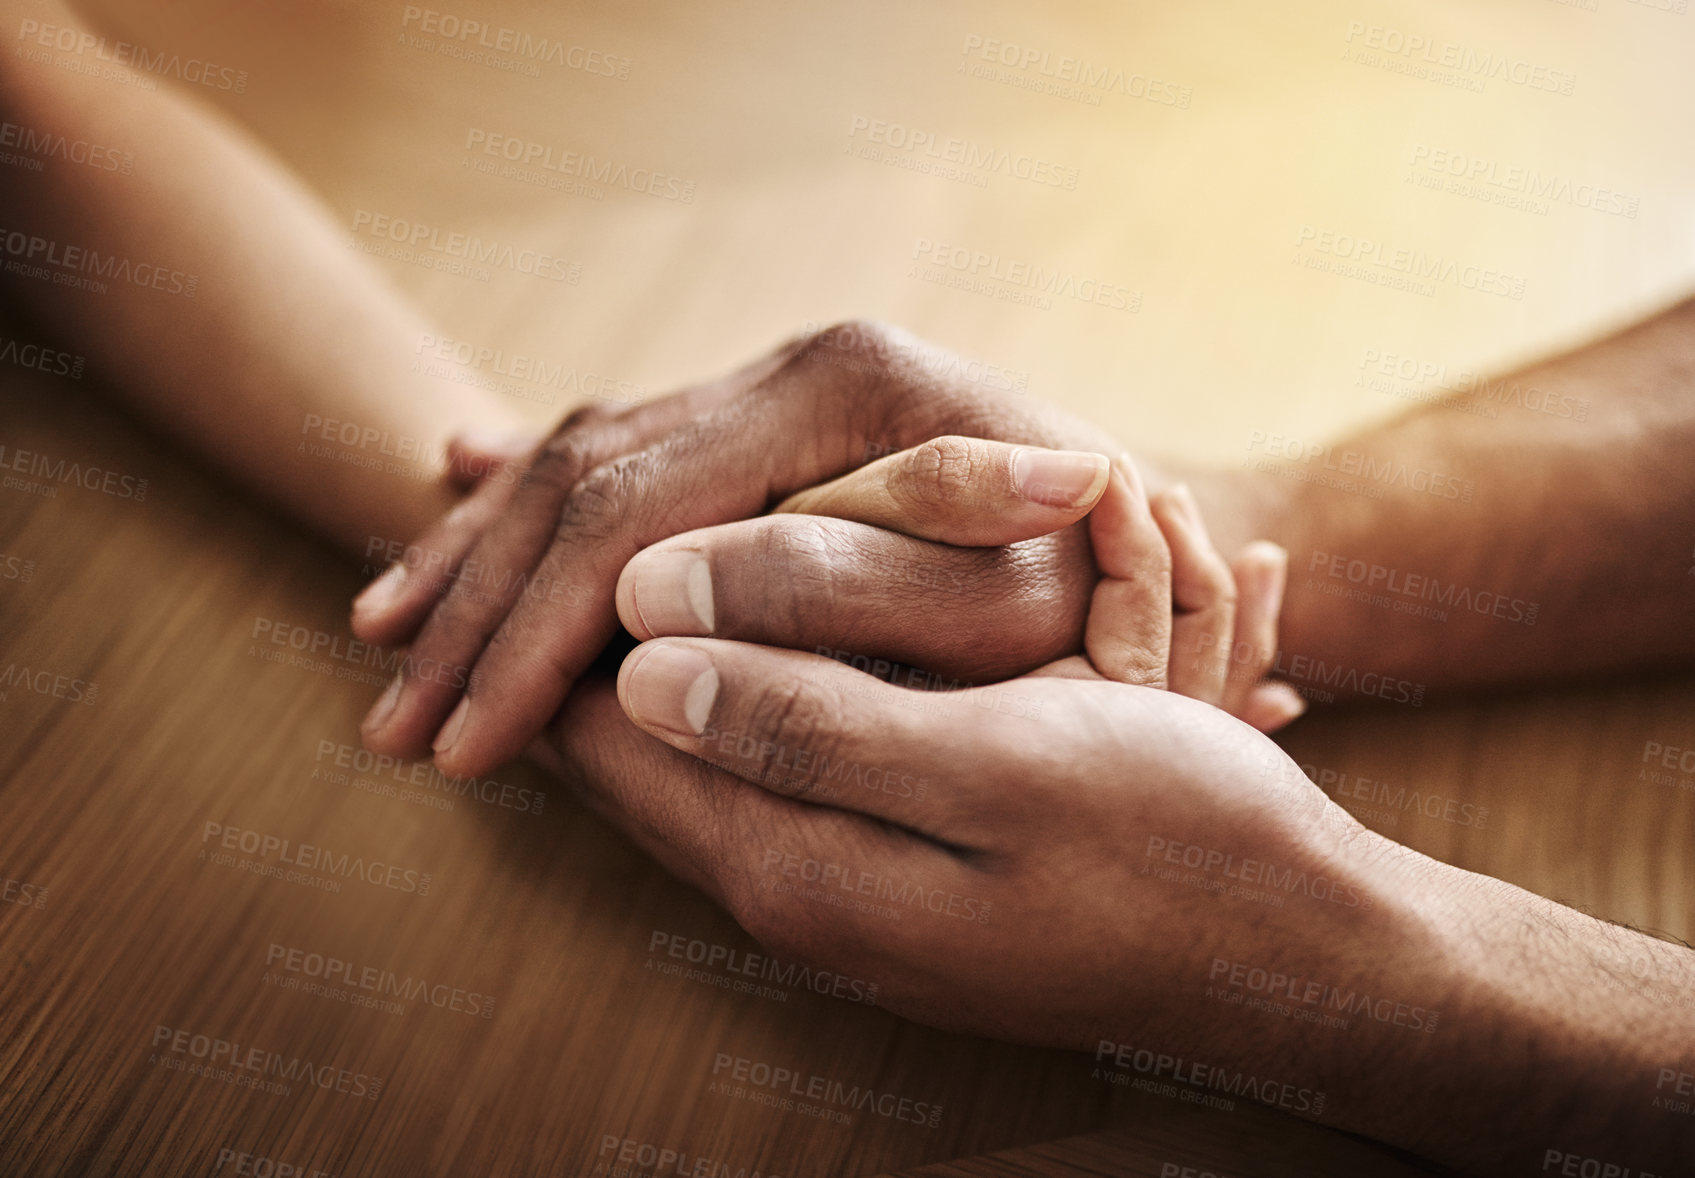 Buy stock photo Holding hands in support and comfort, showing love, care and consoling a friend. Two people together in unity, solidarity and trust, showing kindness, hope and faith while helping and bonding closeup